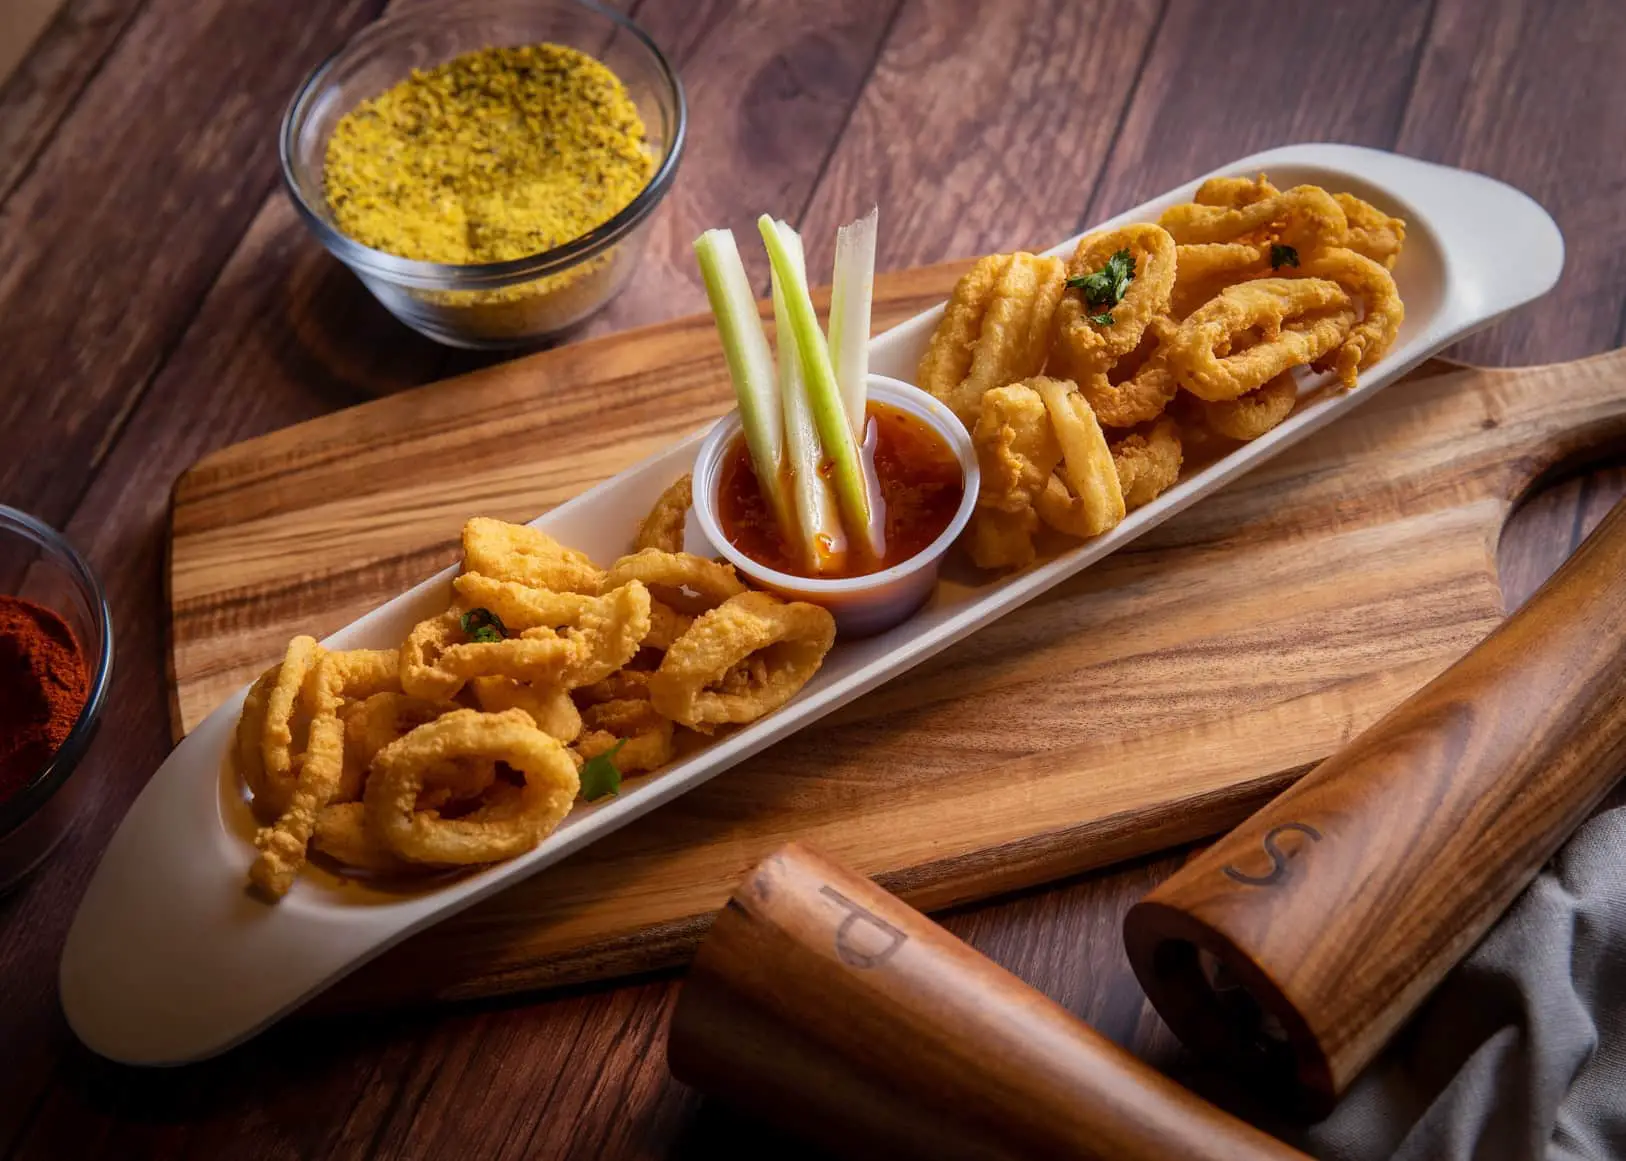 a plate of calamari showing what it is